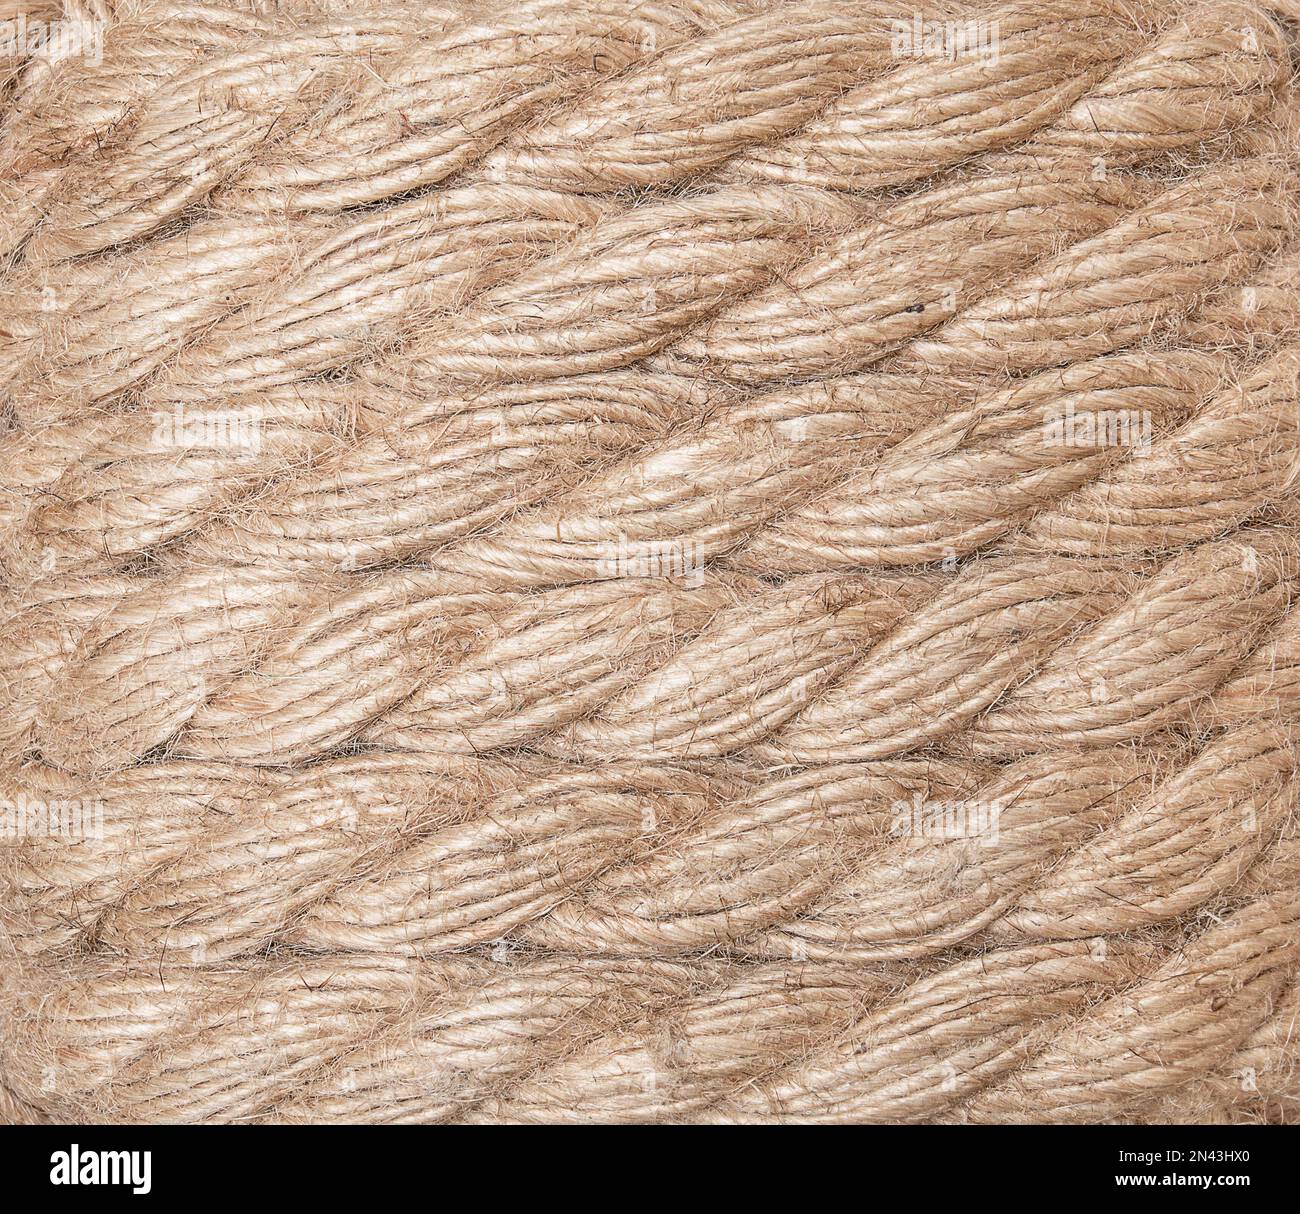 Texture of beige thick jute ropes with pile. Stock Photo